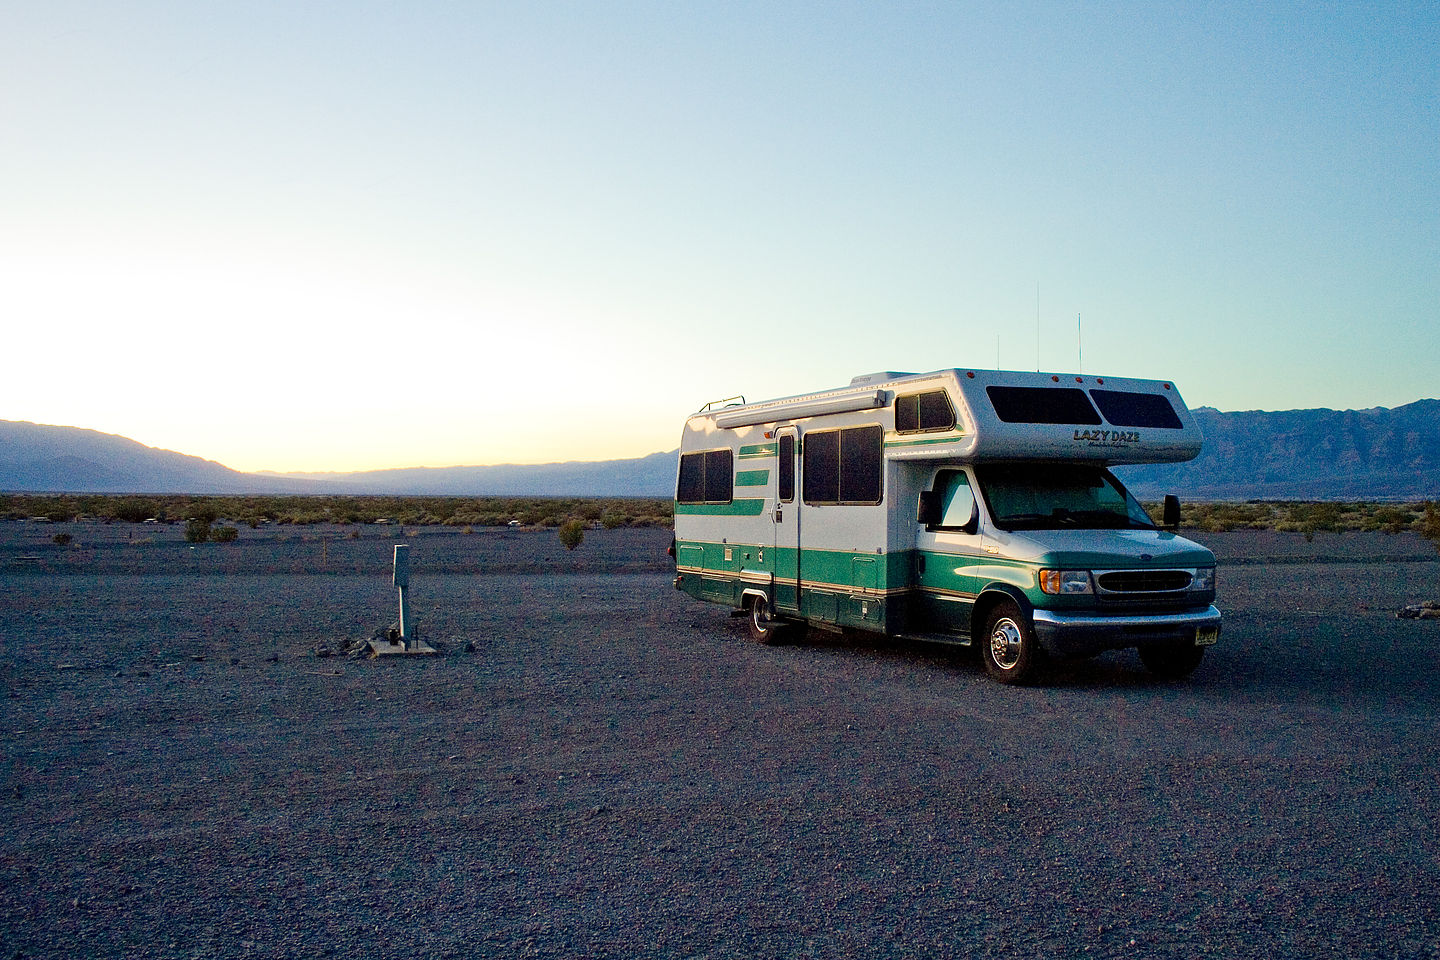 Lazy Daze at Stovepipe Wells Campground - AJG